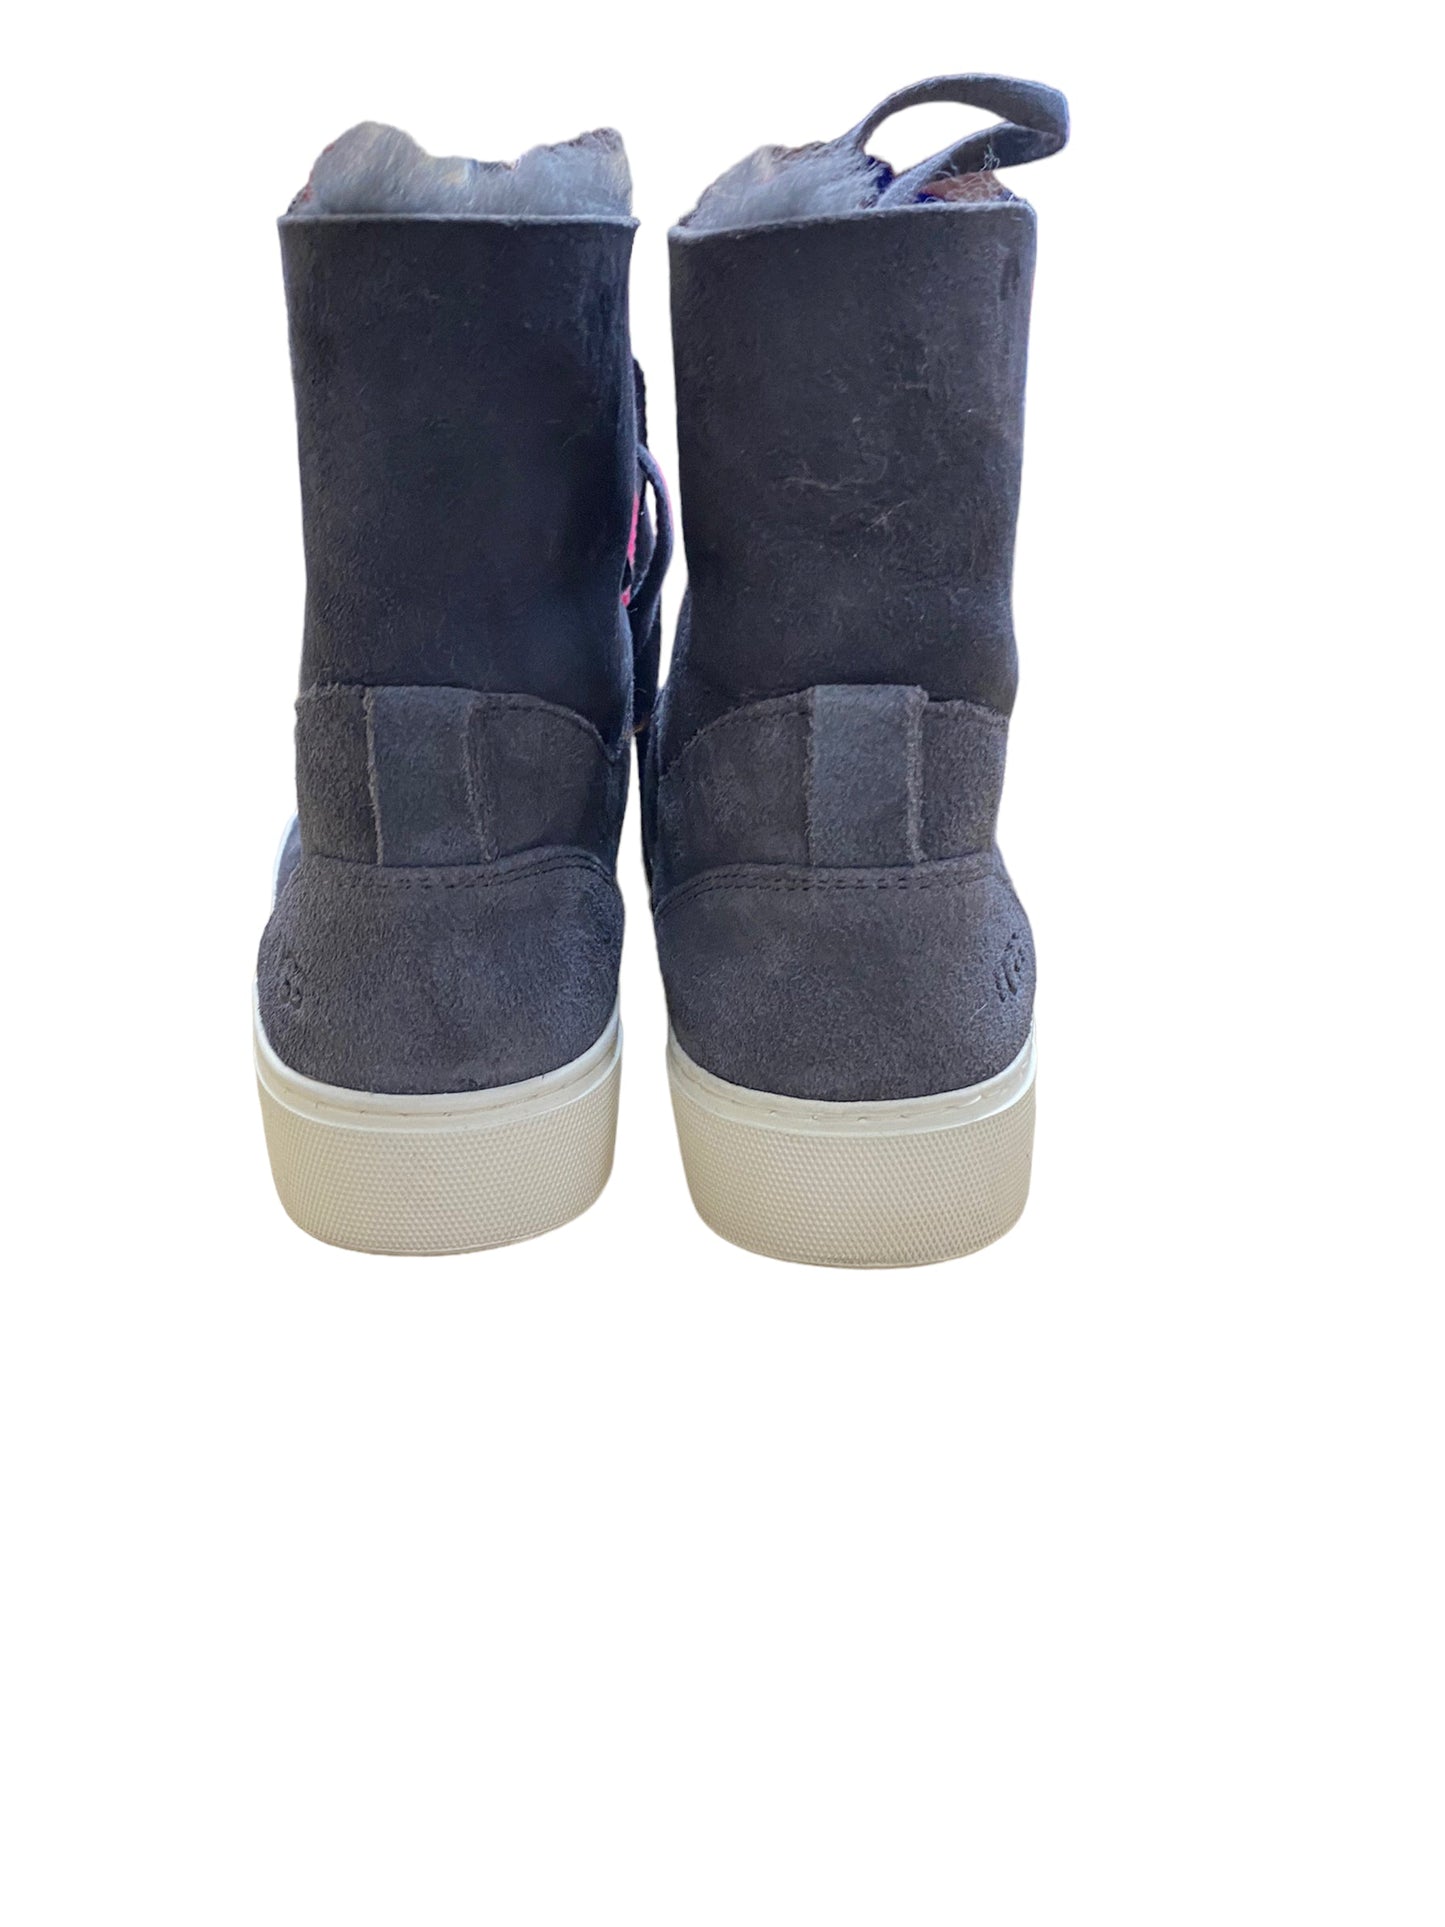 Shoes Sneakers By Ugg  Size: 7